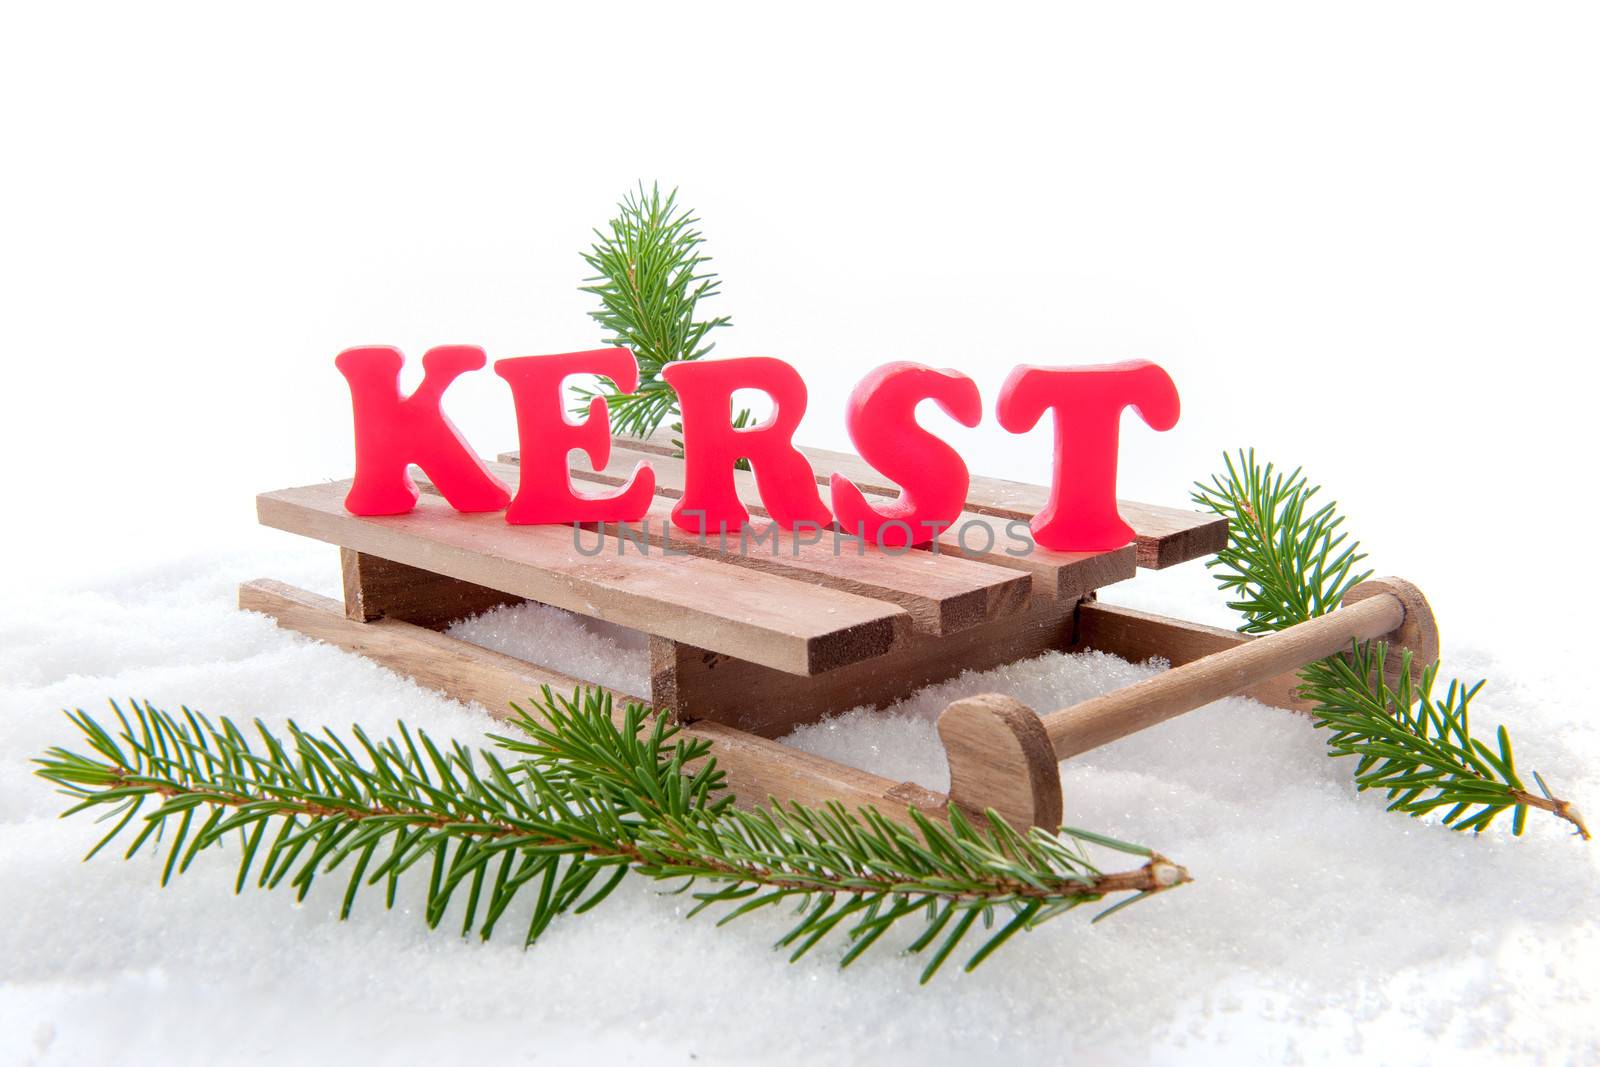 The dutch word for christmas "kerst", red letters on a sleigh, with a pine branch